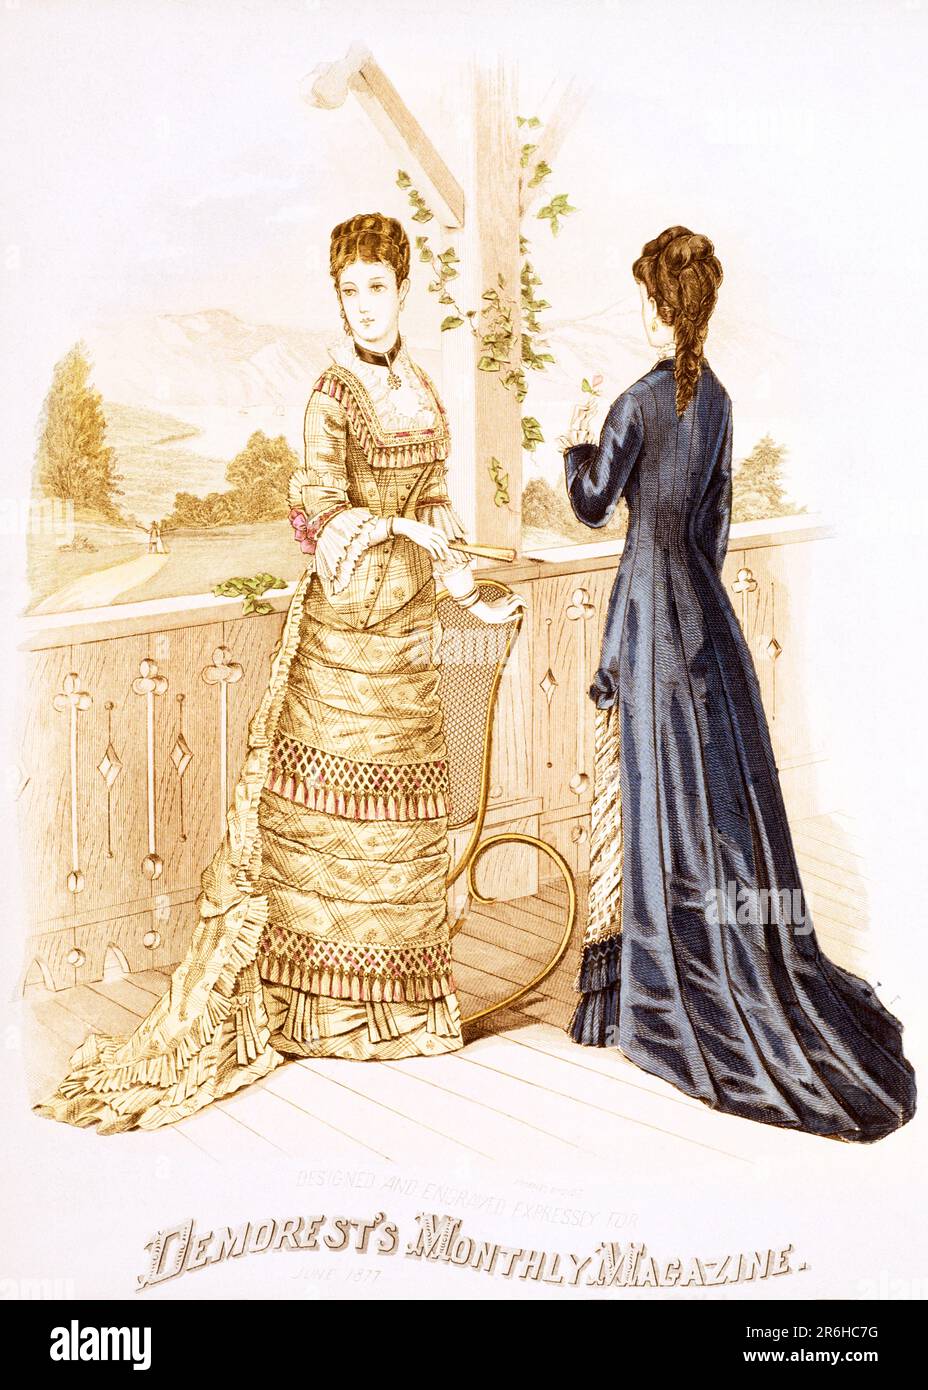 1870s DRAWING OF LADY’S FASHIONS TWO WOMEN STANDING ON A VERANDA FROM THE JUNE 1877 DEMORESTS MONTHLY MAGAZINE - ko4268 NAW001 HARS HOME LIFE COPY SPACE FULL-LENGTH LADIES PERSONS INSPIRATION ENTERTAINMENT BUSINESSWOMAN DRESSES SUCCESS SELLING PATTERNS STYLES STRATEGY CUSTOMER SERVICE AND NETWORKING CHOICE EXCITEMENT KNOWLEDGE RECREATION SUCCESSFUL PRIDE OPPORTUNITY TO OCCUPATIONS CONCEPTUAL MONTHLY 1870s ESTABLISHED PARLOR STYLISH BUSINESSWOMEN CURTIS DIY 1860 ARBITER CREATIVITY DRESSMAKING FASHIONS INVENTOR MID-ADULT MID-ADULT WOMAN MILLINER ORDINARY YOUNG ADULT WOMAN 1877 Stock Photo